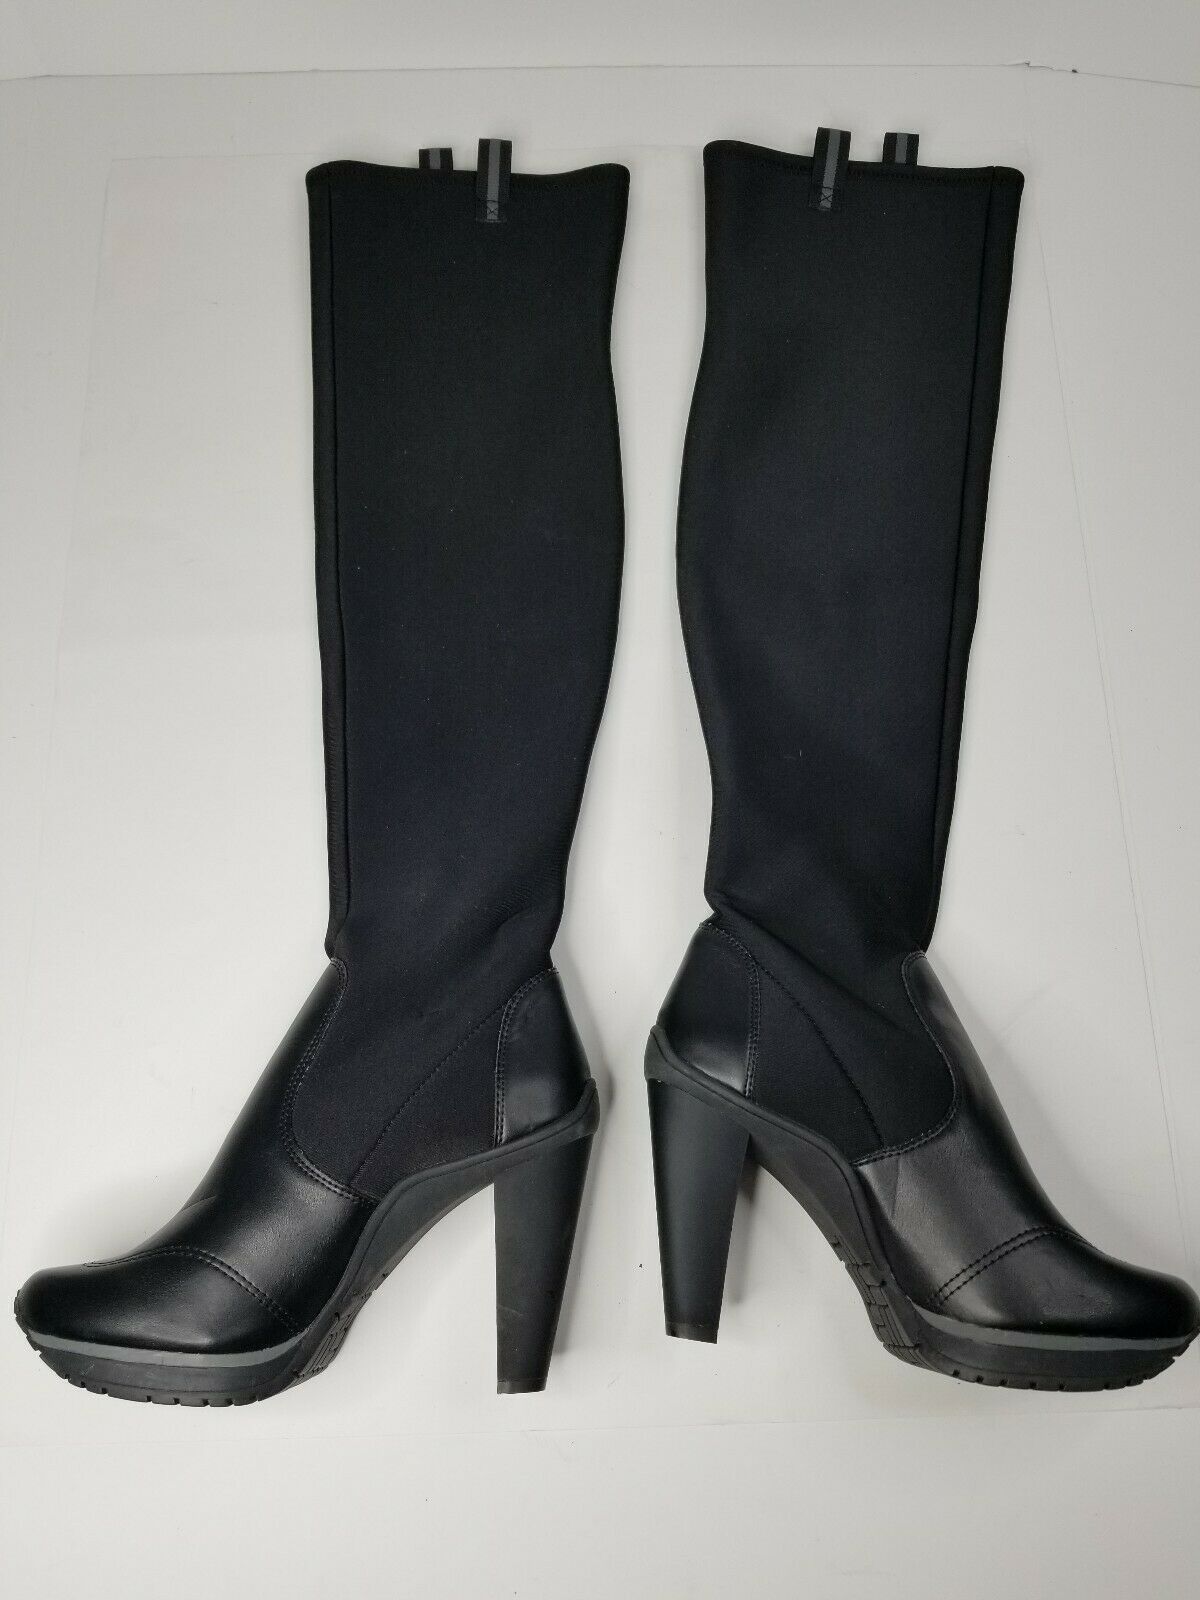 DKNY DKNY Browning Womens Black Neoprene Over-The-Knee Boots Size US 10 / EU 43 - 5 Thumbnail